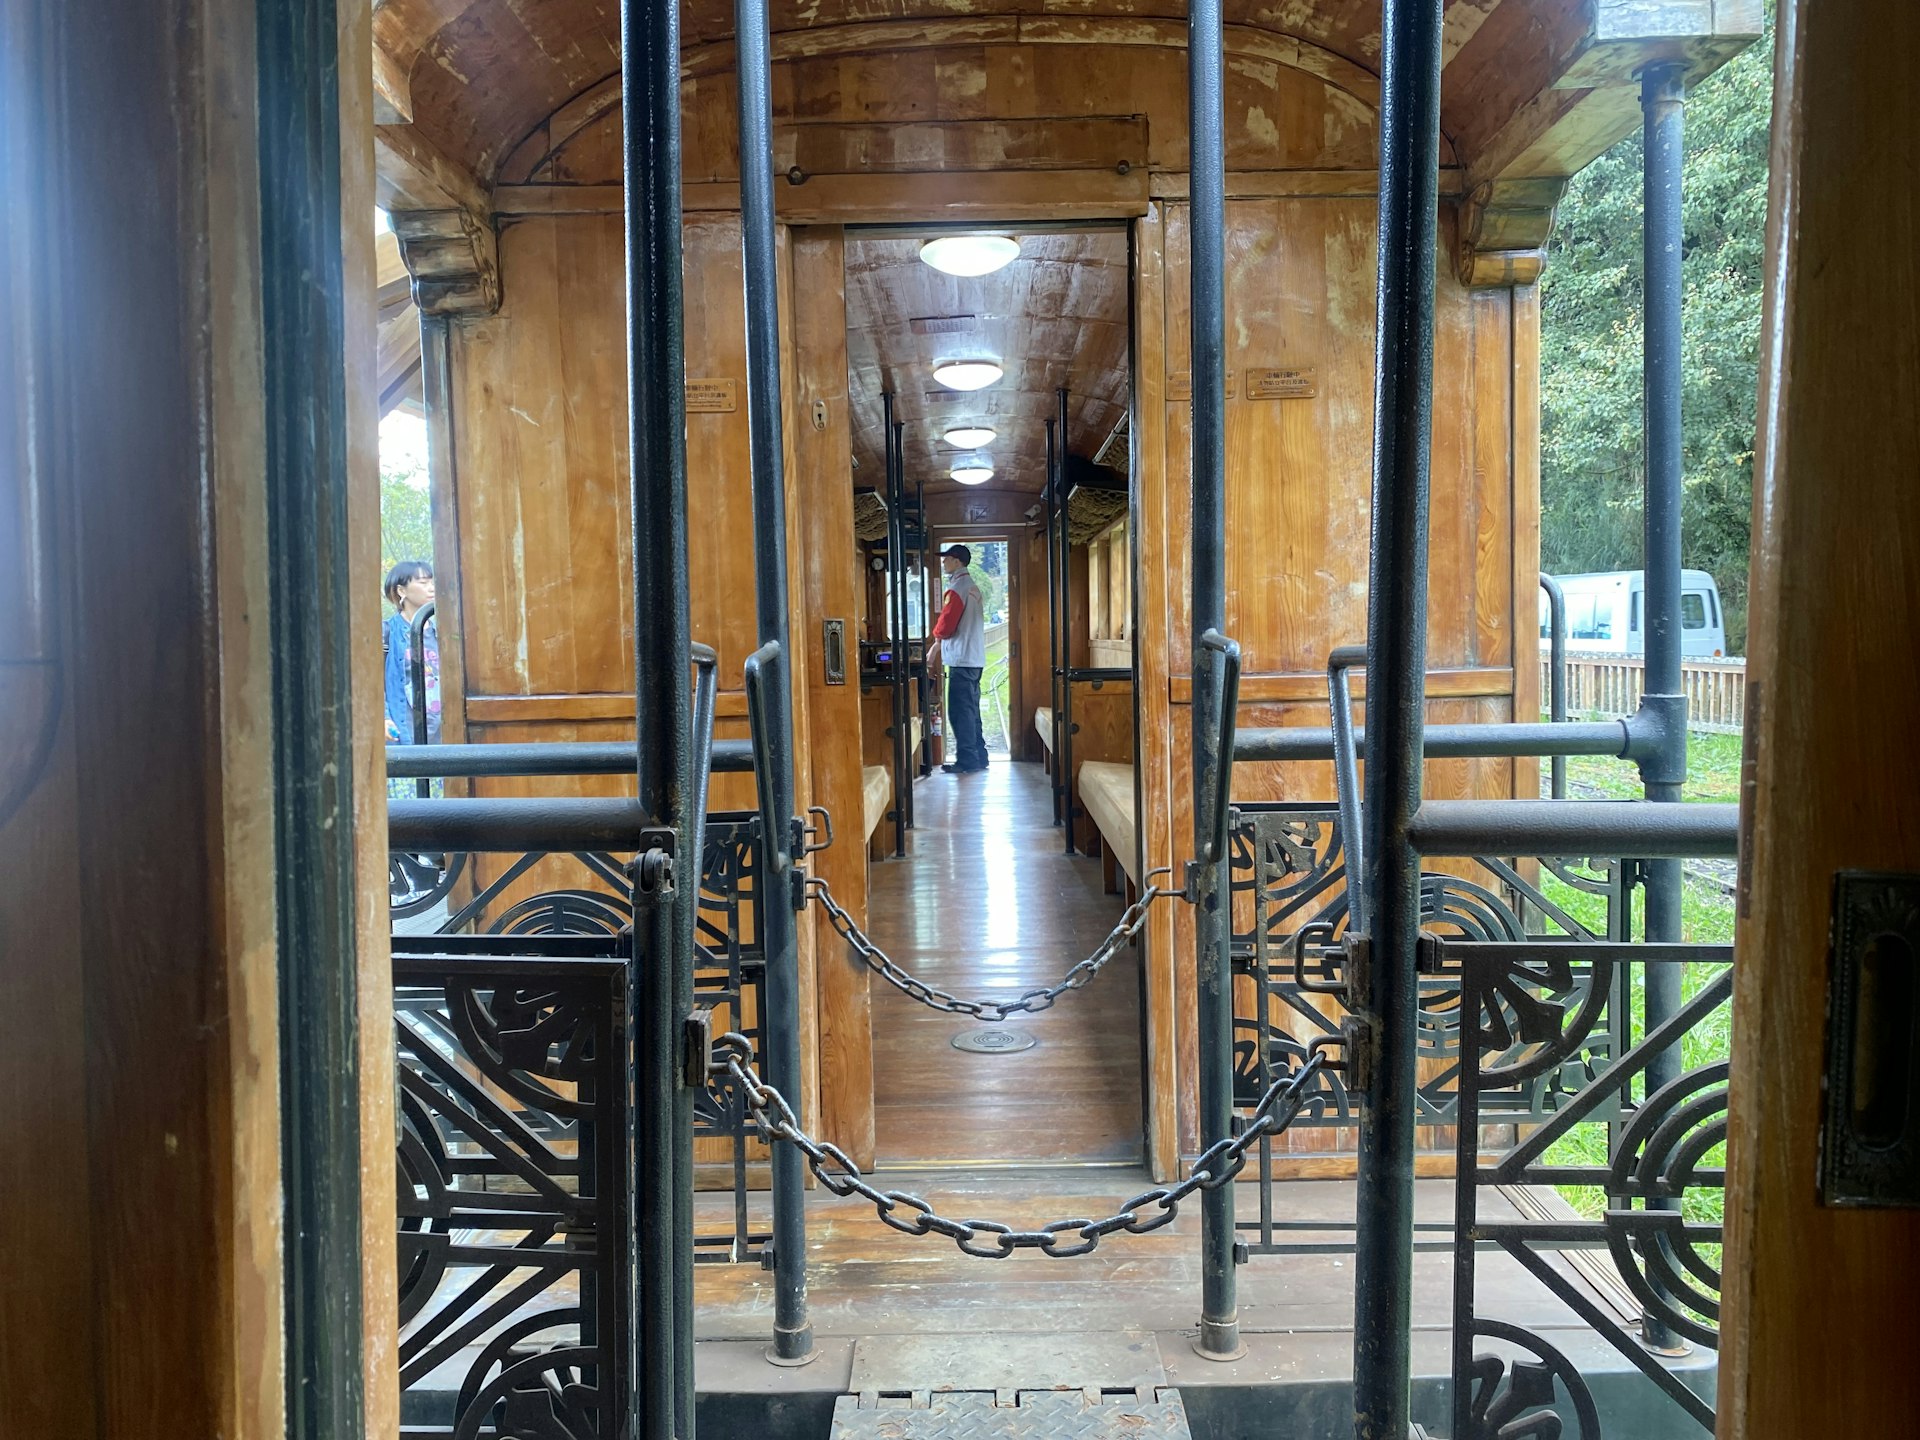 The interior of a historic carriage on the Alishan Forest Railway, Taiwan